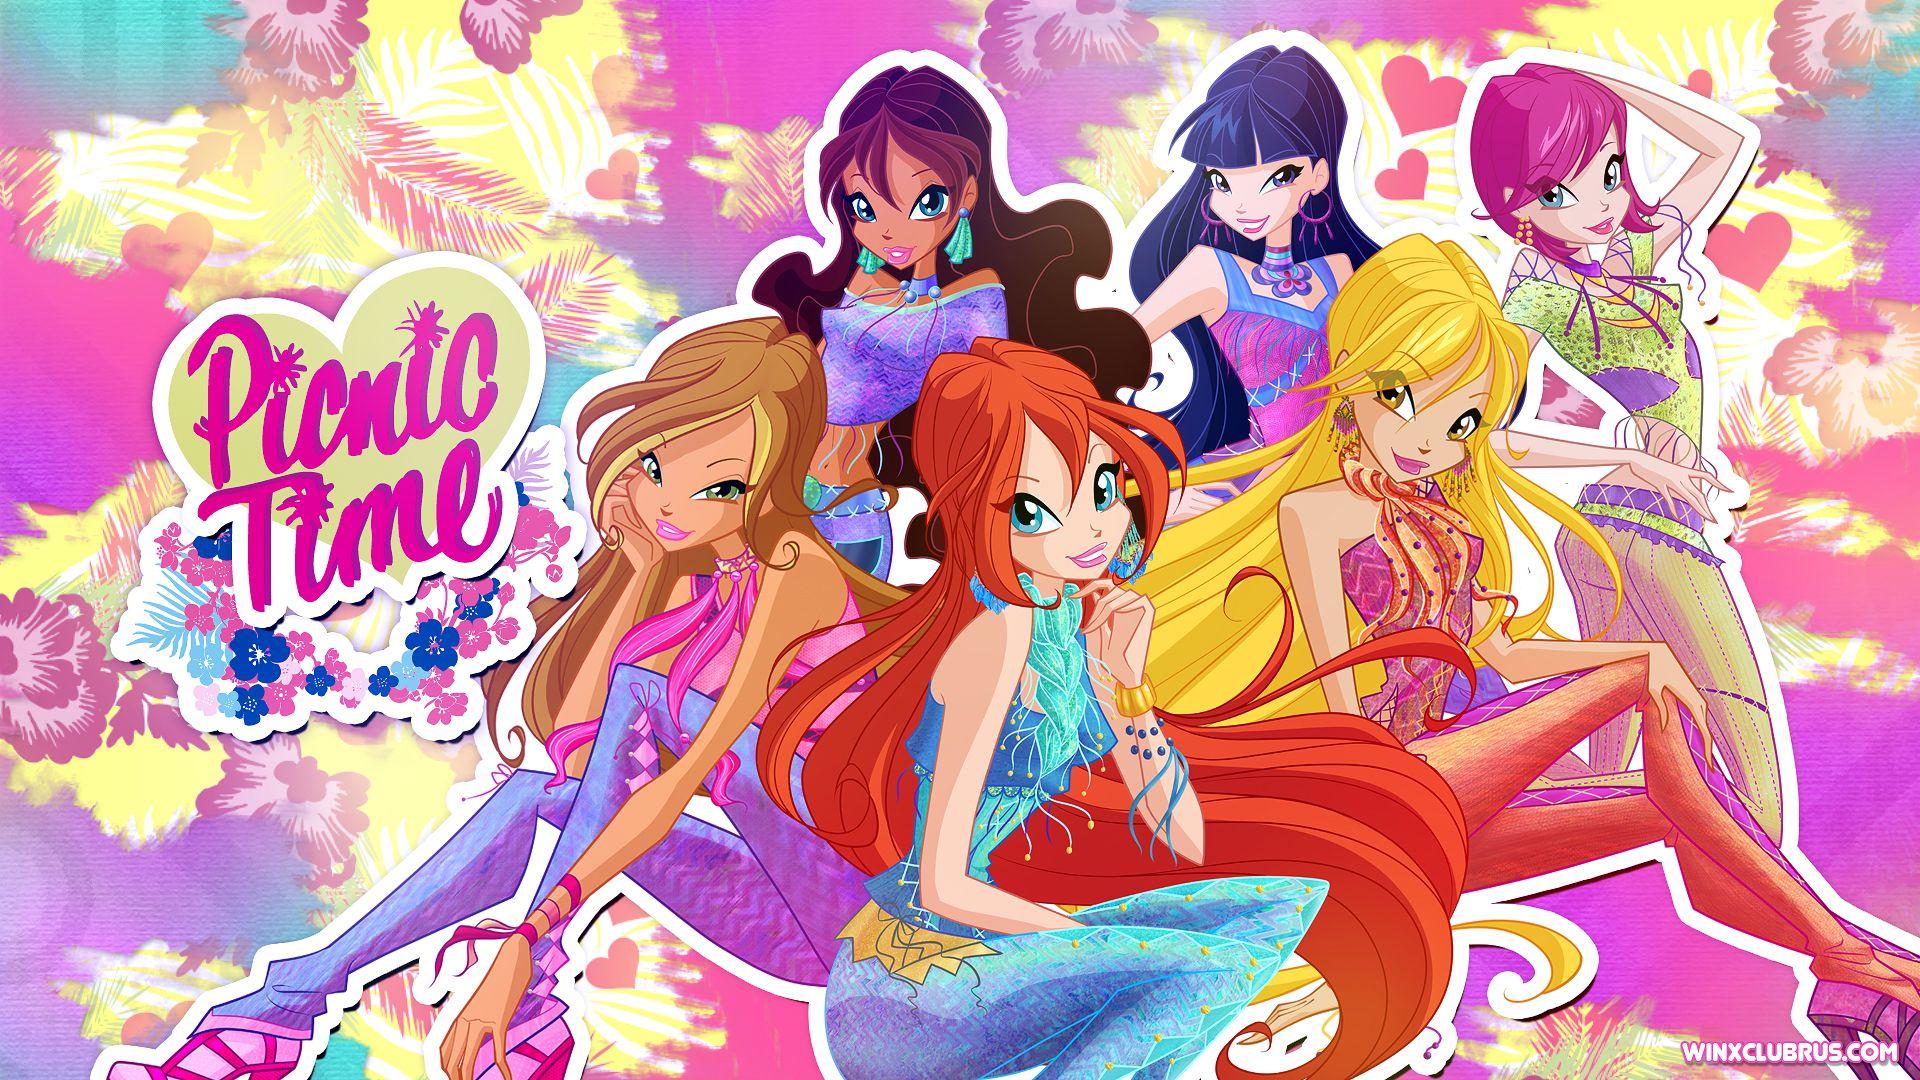 Winx Club new bright and colorful wallpaper with lots of transformations and styles